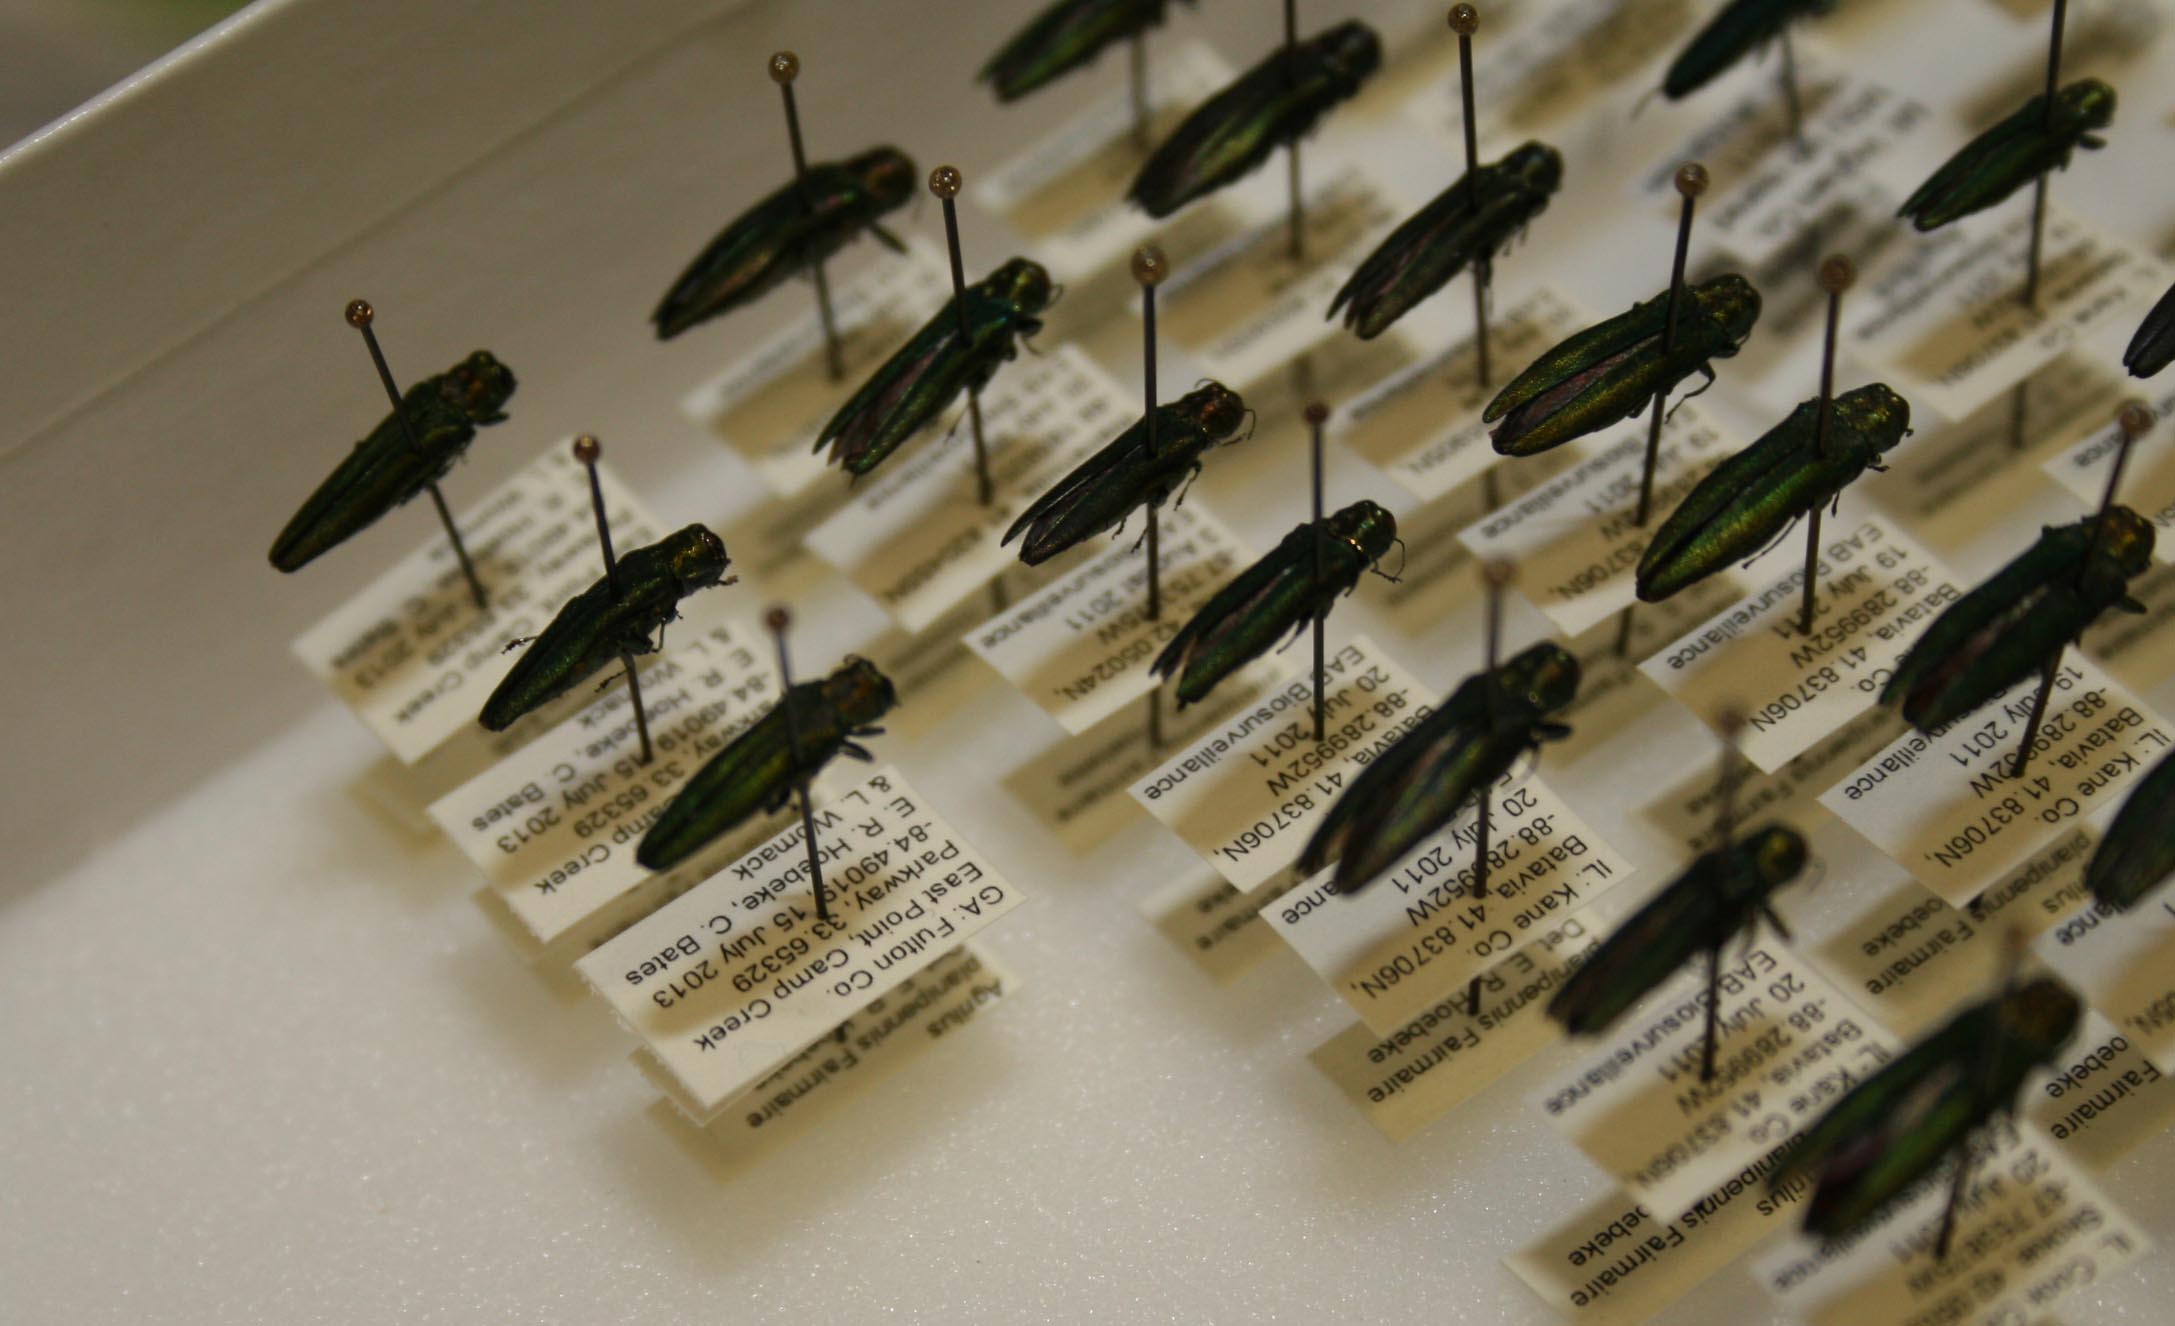 Close up of emerald ash borers in the Georgia Natural History Museum.